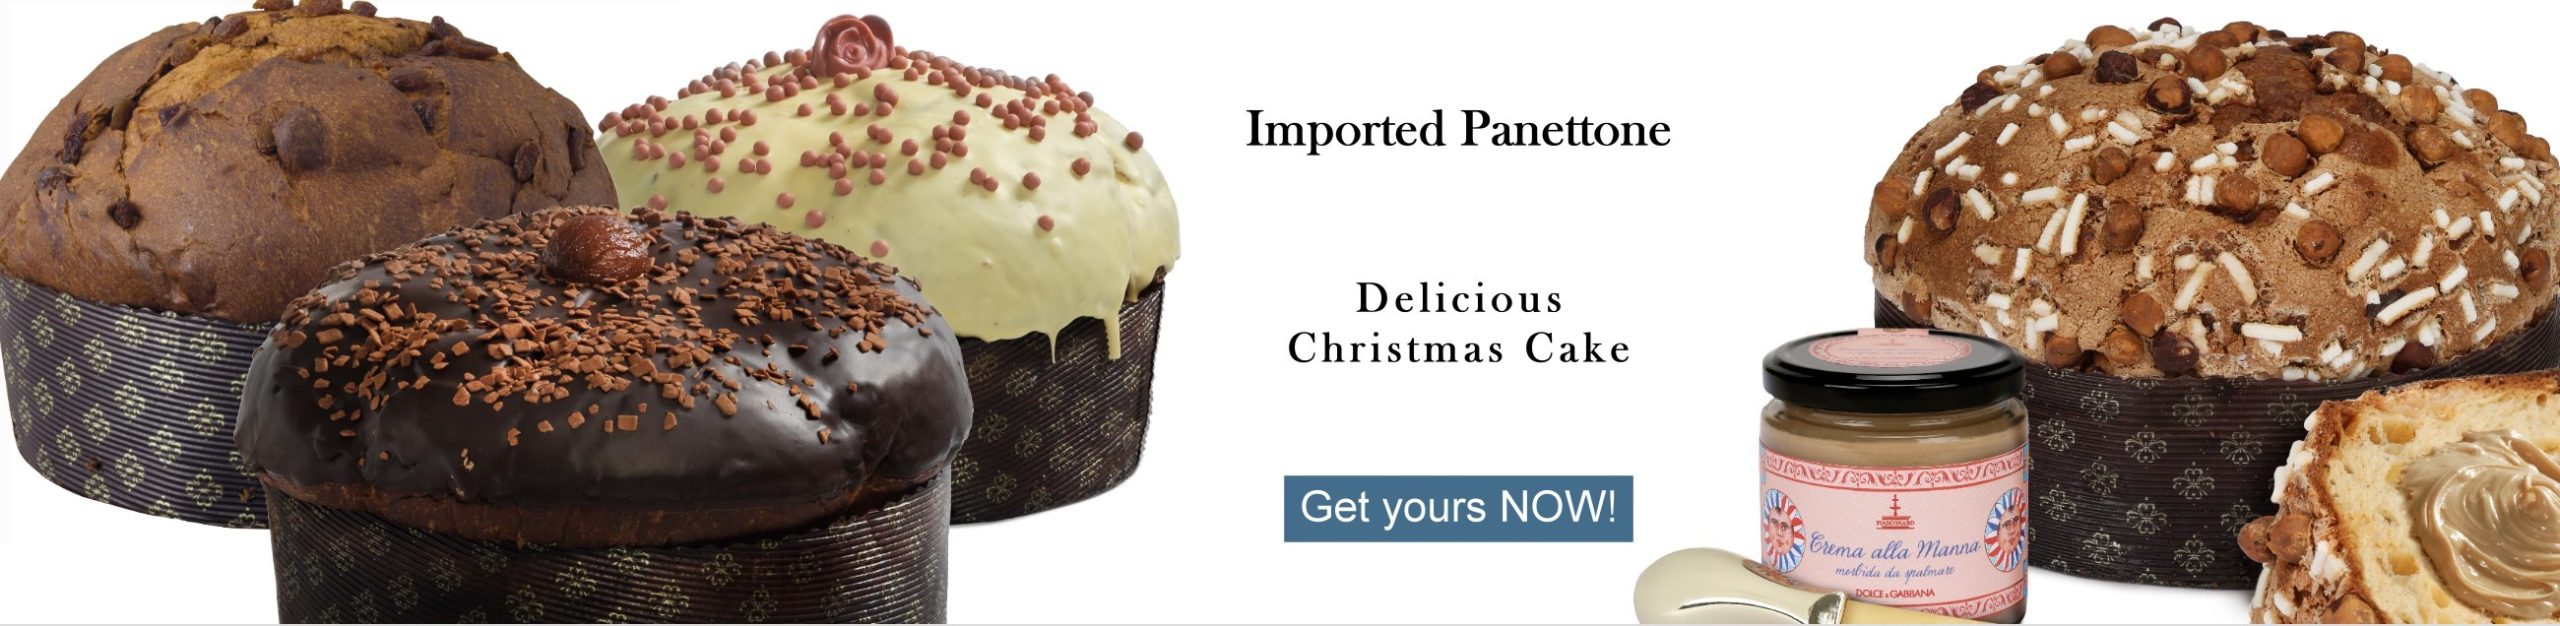 Imported Panettone - Delicious Christmas Cake